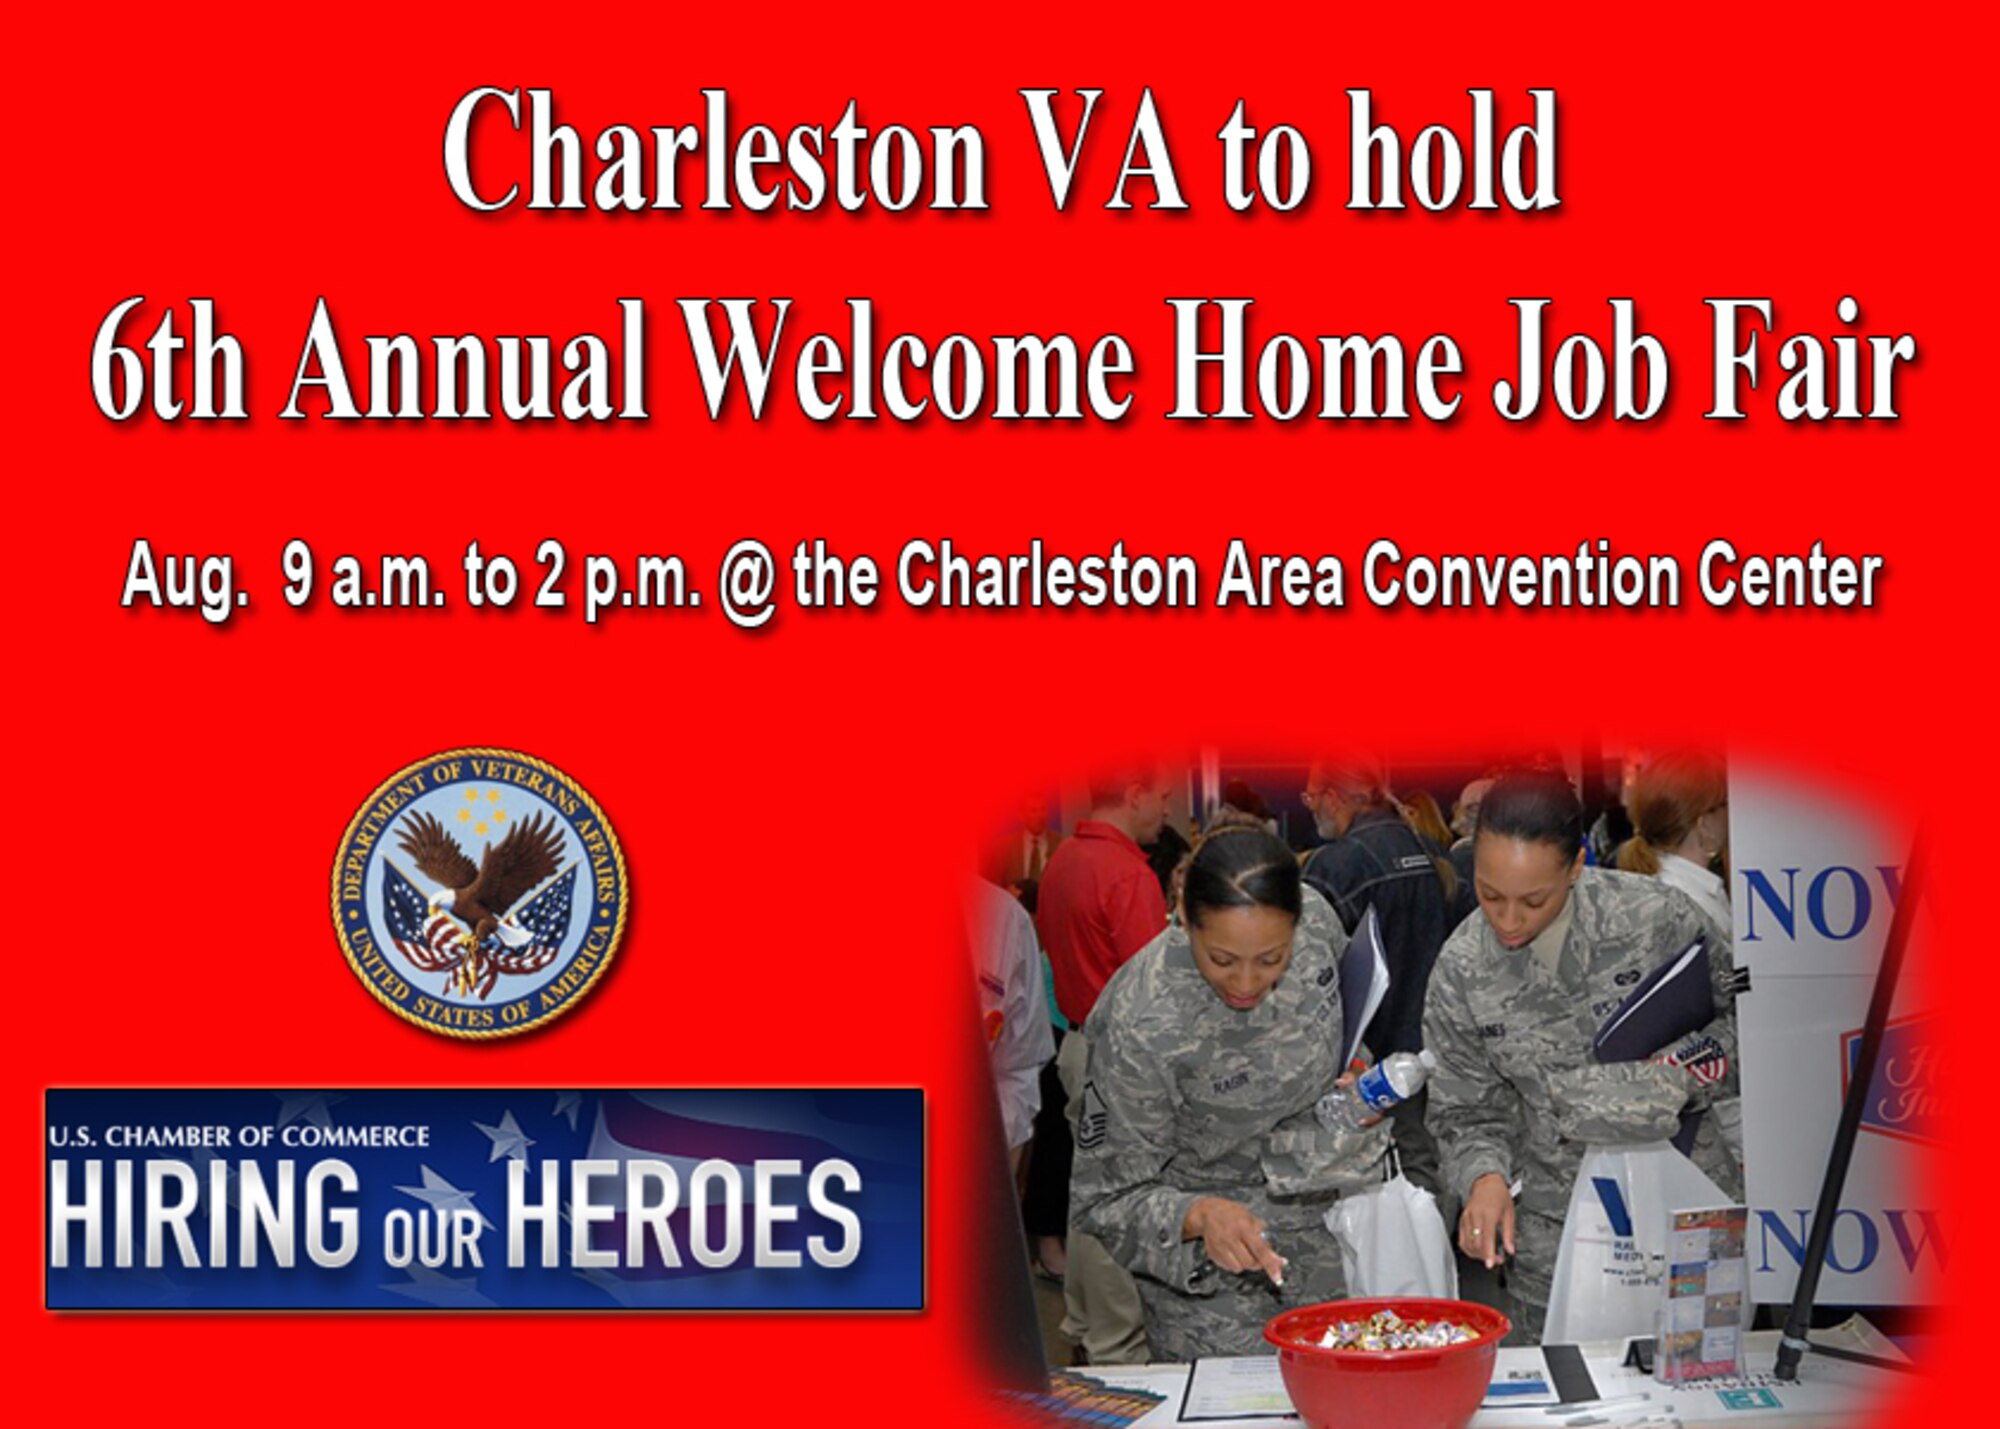 Charleston S.C. -- Lowcountry Veterans seeking employment have an opportunity for a little job-seeking help from the VA and local employers at the Sixth Annual Veterans Welcome Home Job Fair Event in the Charleston Area Convention Center Aug. 8, 9 a.m. to 2 p.m.
